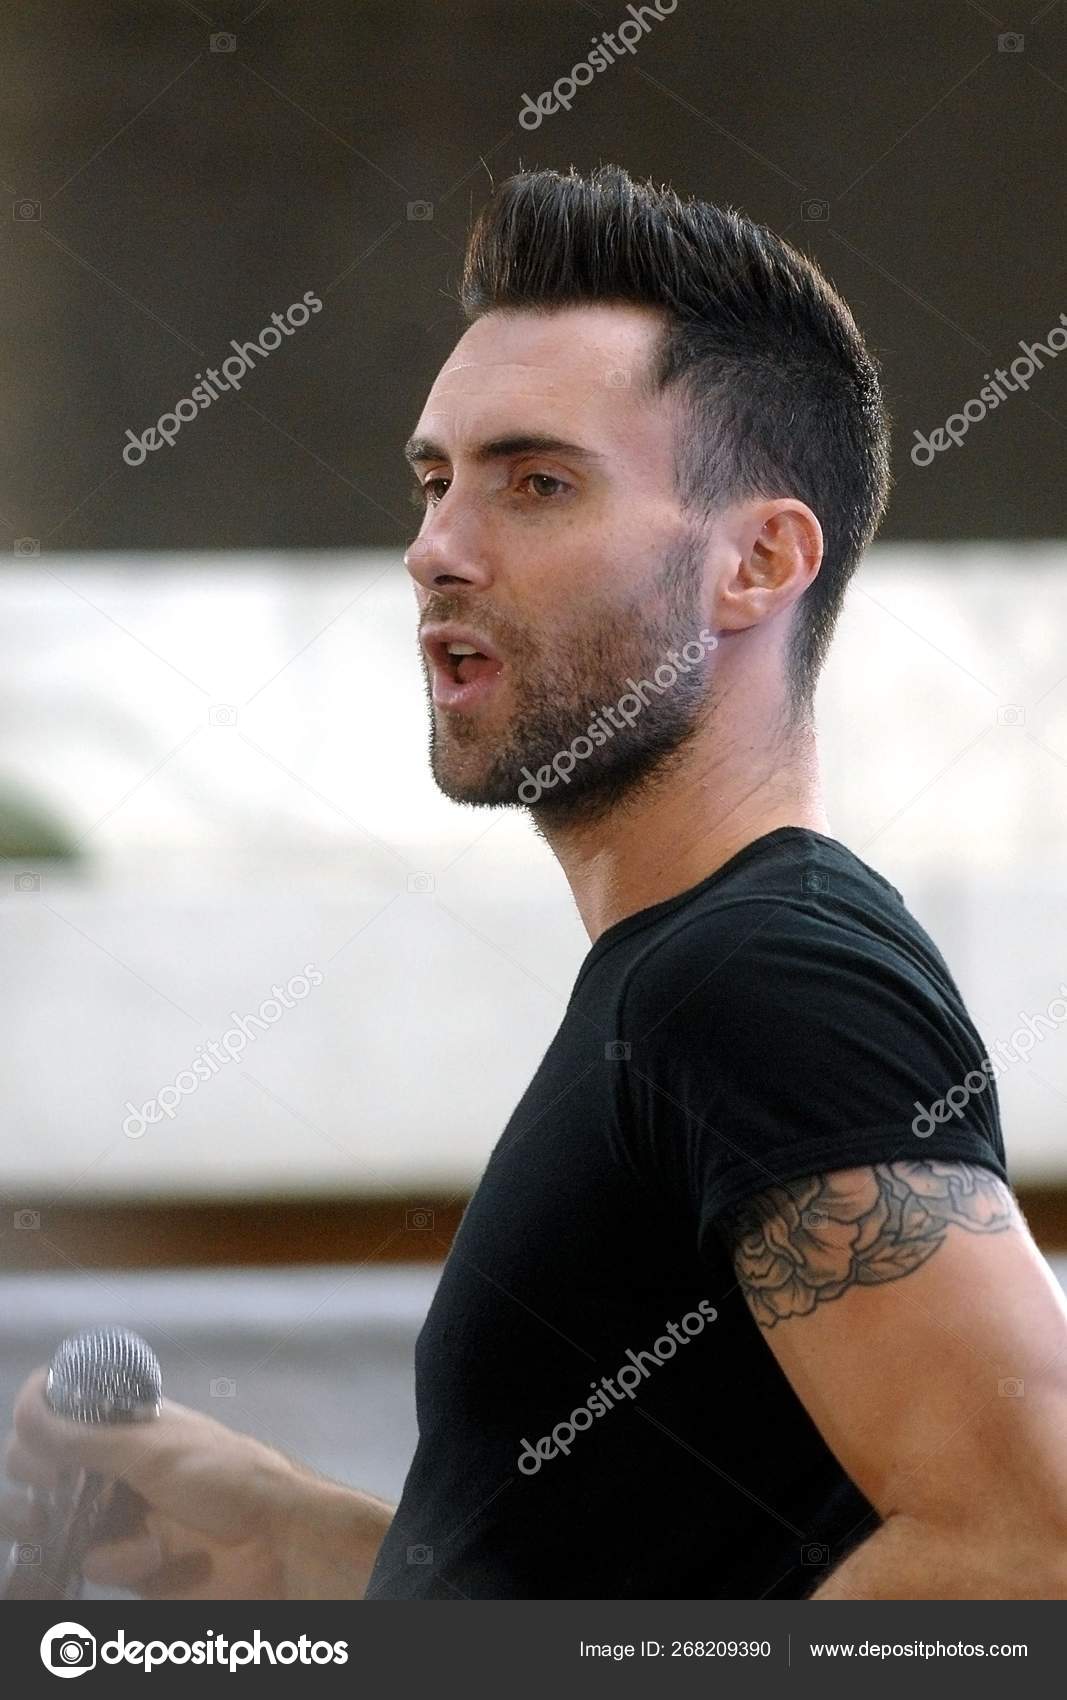 Three Questions for Adam Levine About That Haircut - Popdust